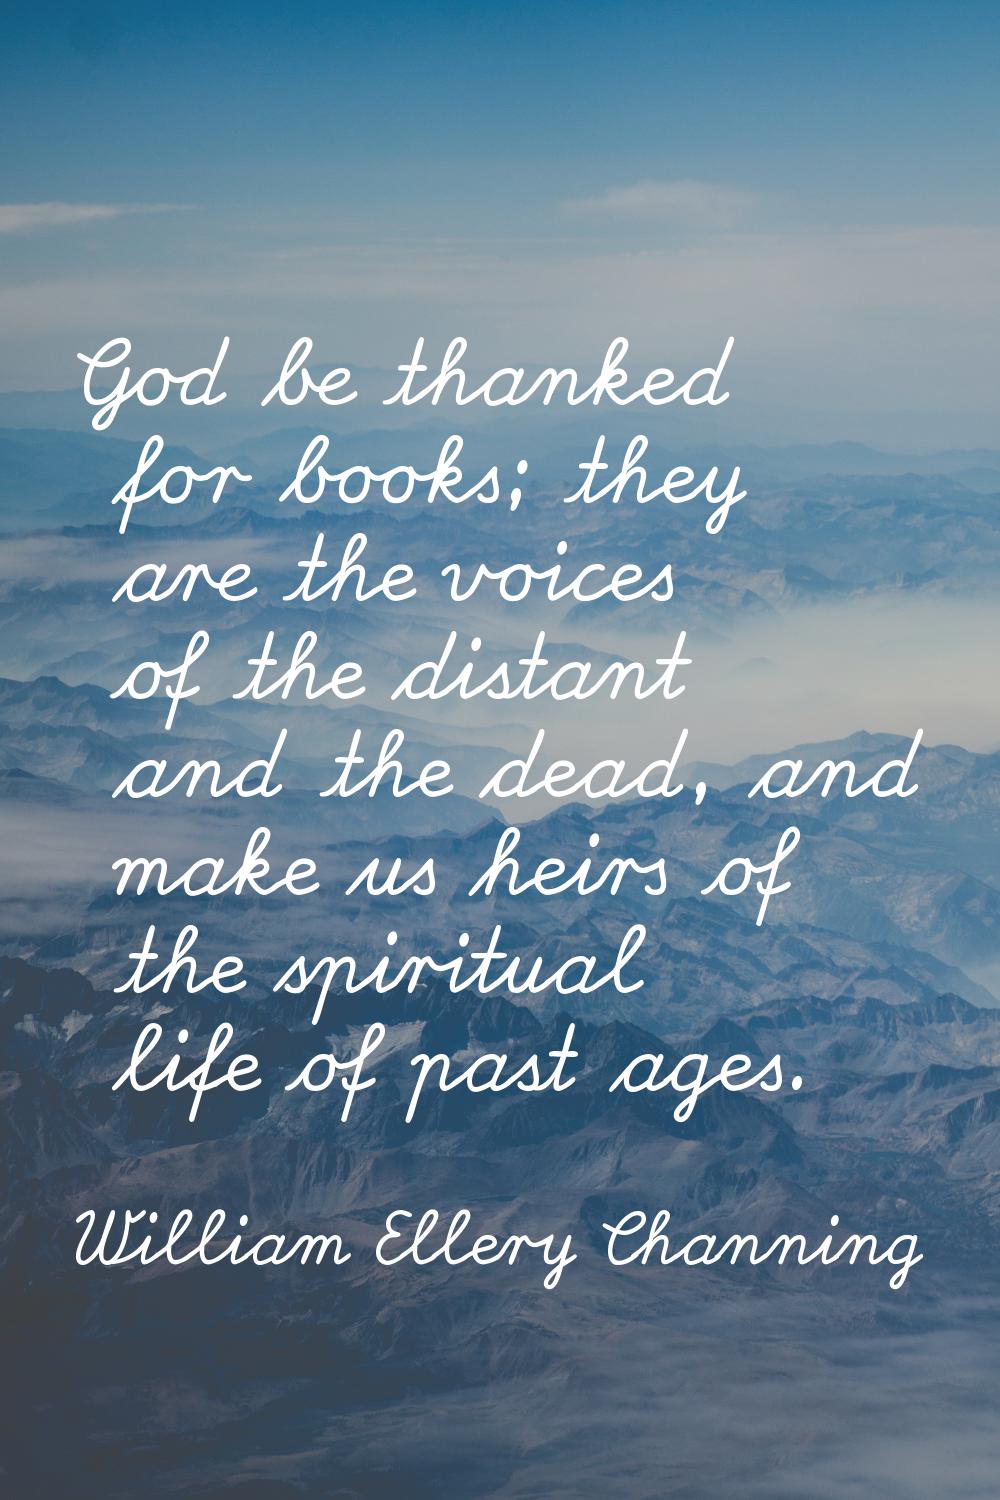 God be thanked for books; they are the voices of the distant and the dead, and make us heirs of the